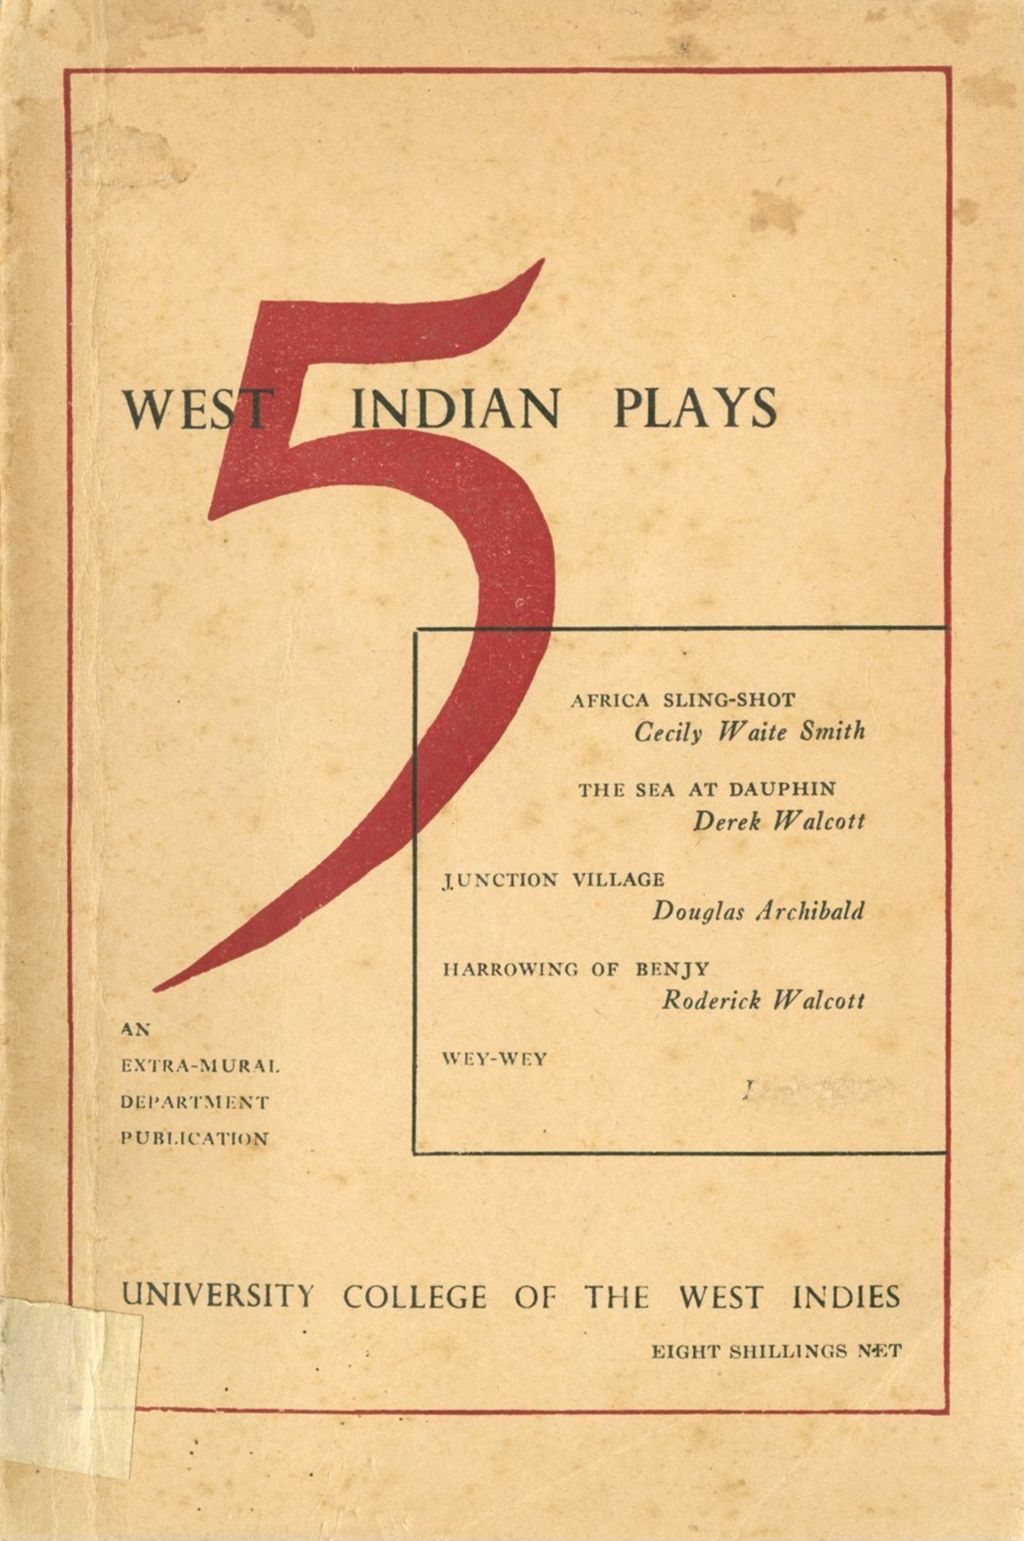 Miniature of 5 West Indian plays (front cover)